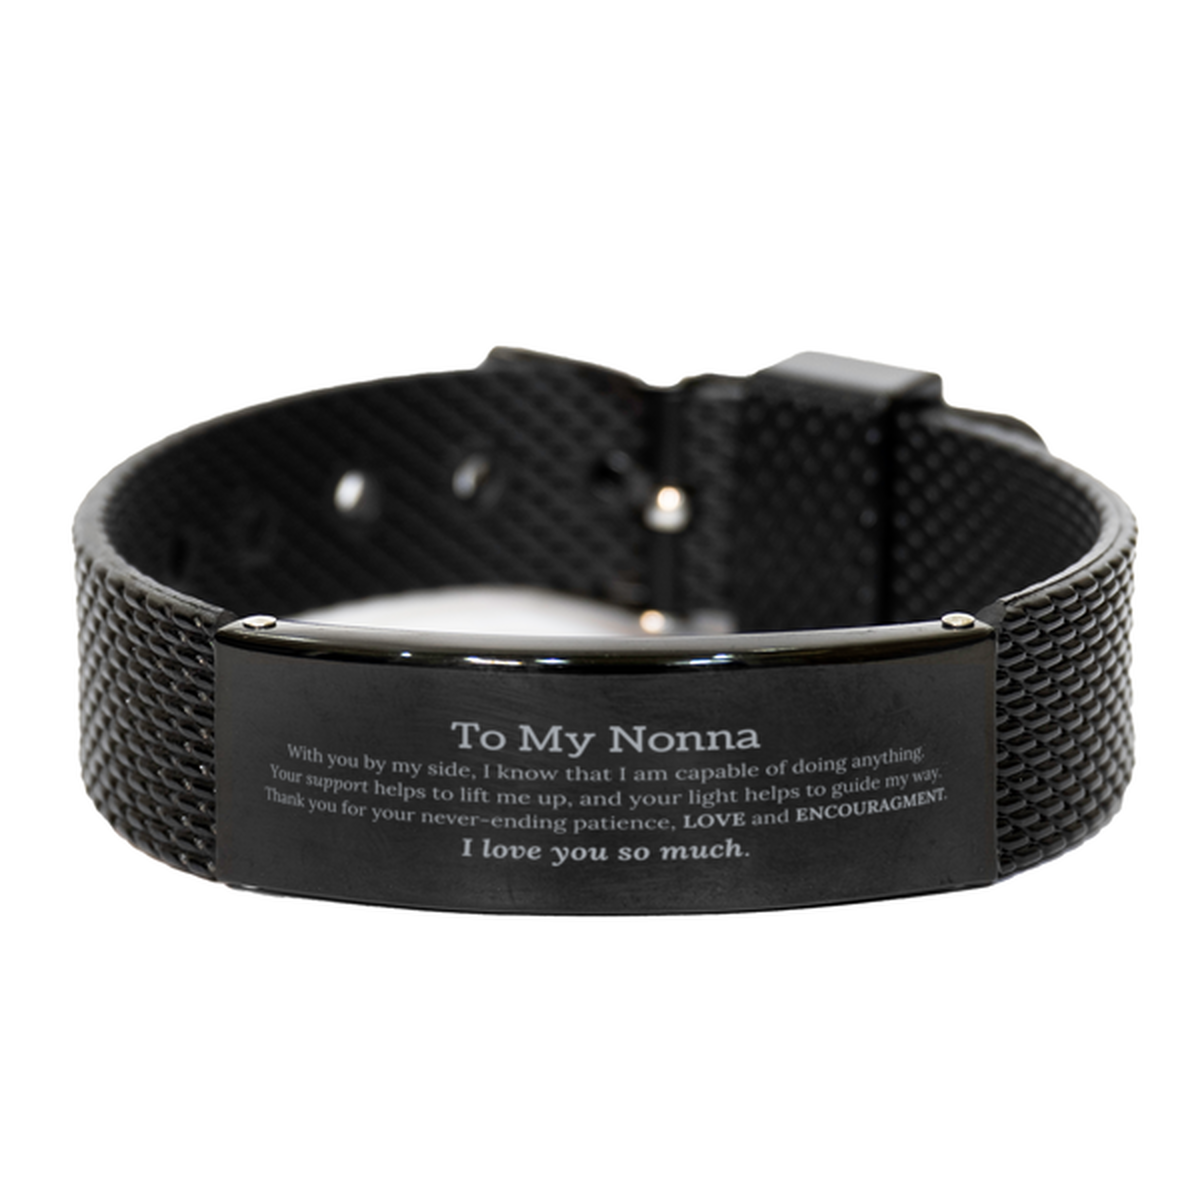 Appreciation Nonna Black Shark Mesh Bracelet Gifts, To My Nonna Birthday Christmas Wedding Keepsake Gifts for Nonna With you by my side, I know that I am capable of doing anything. I love you so much